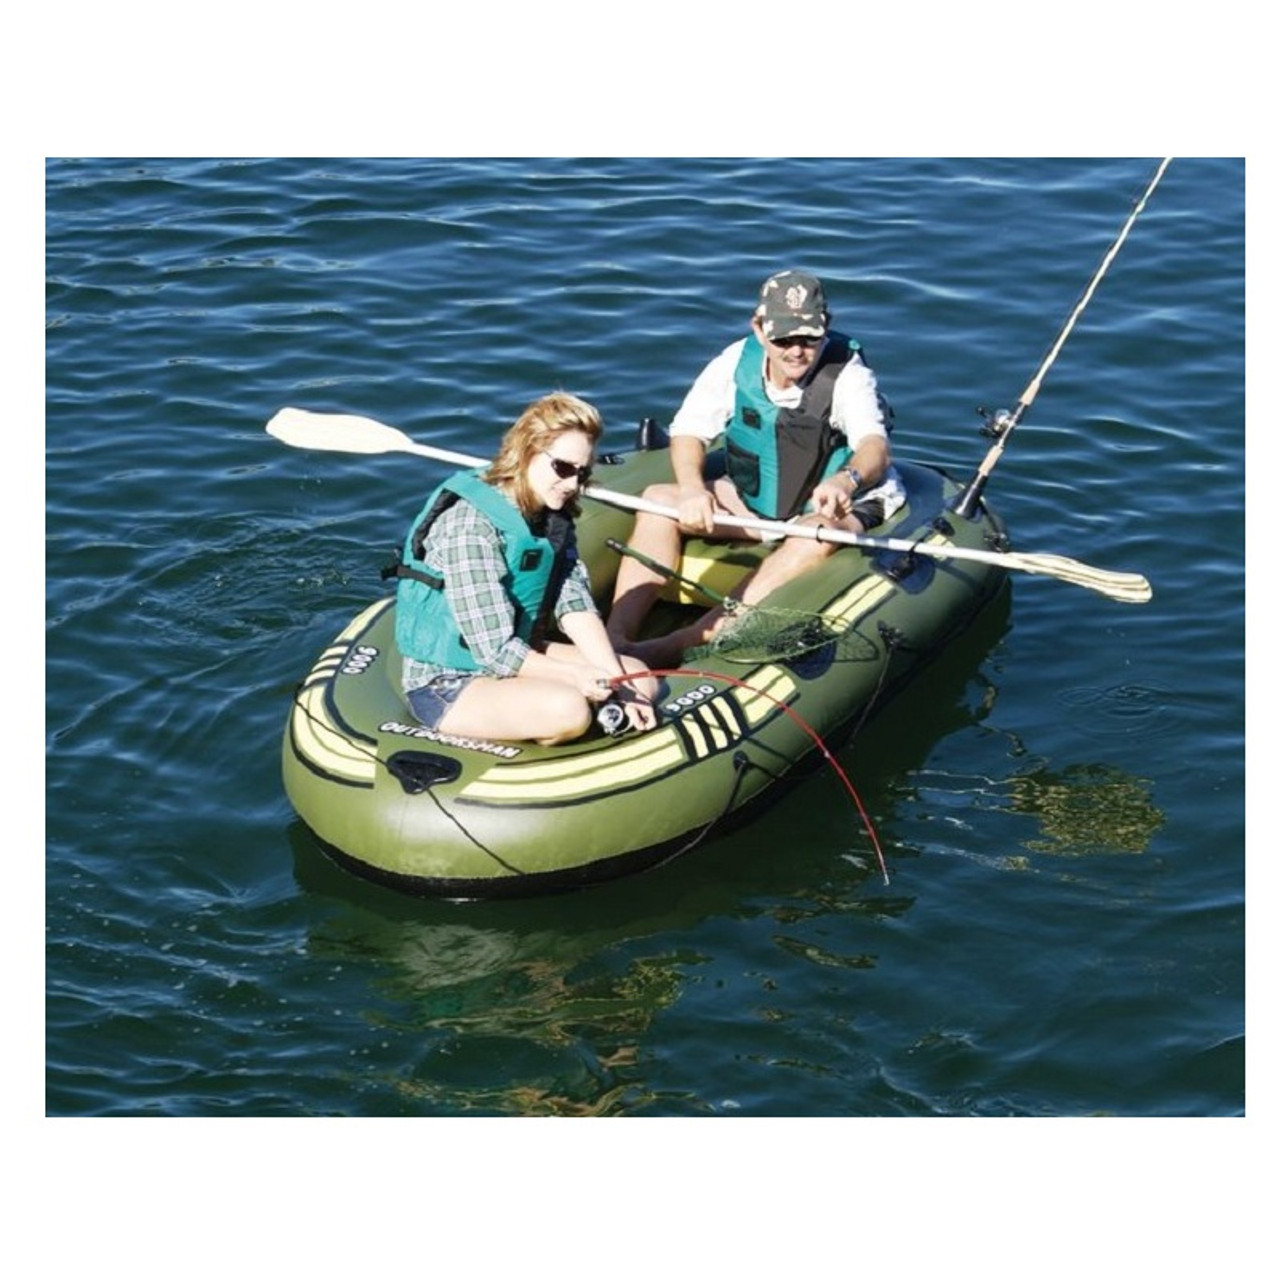 Solstice Outdoorsman Inflatable Fishing Boat